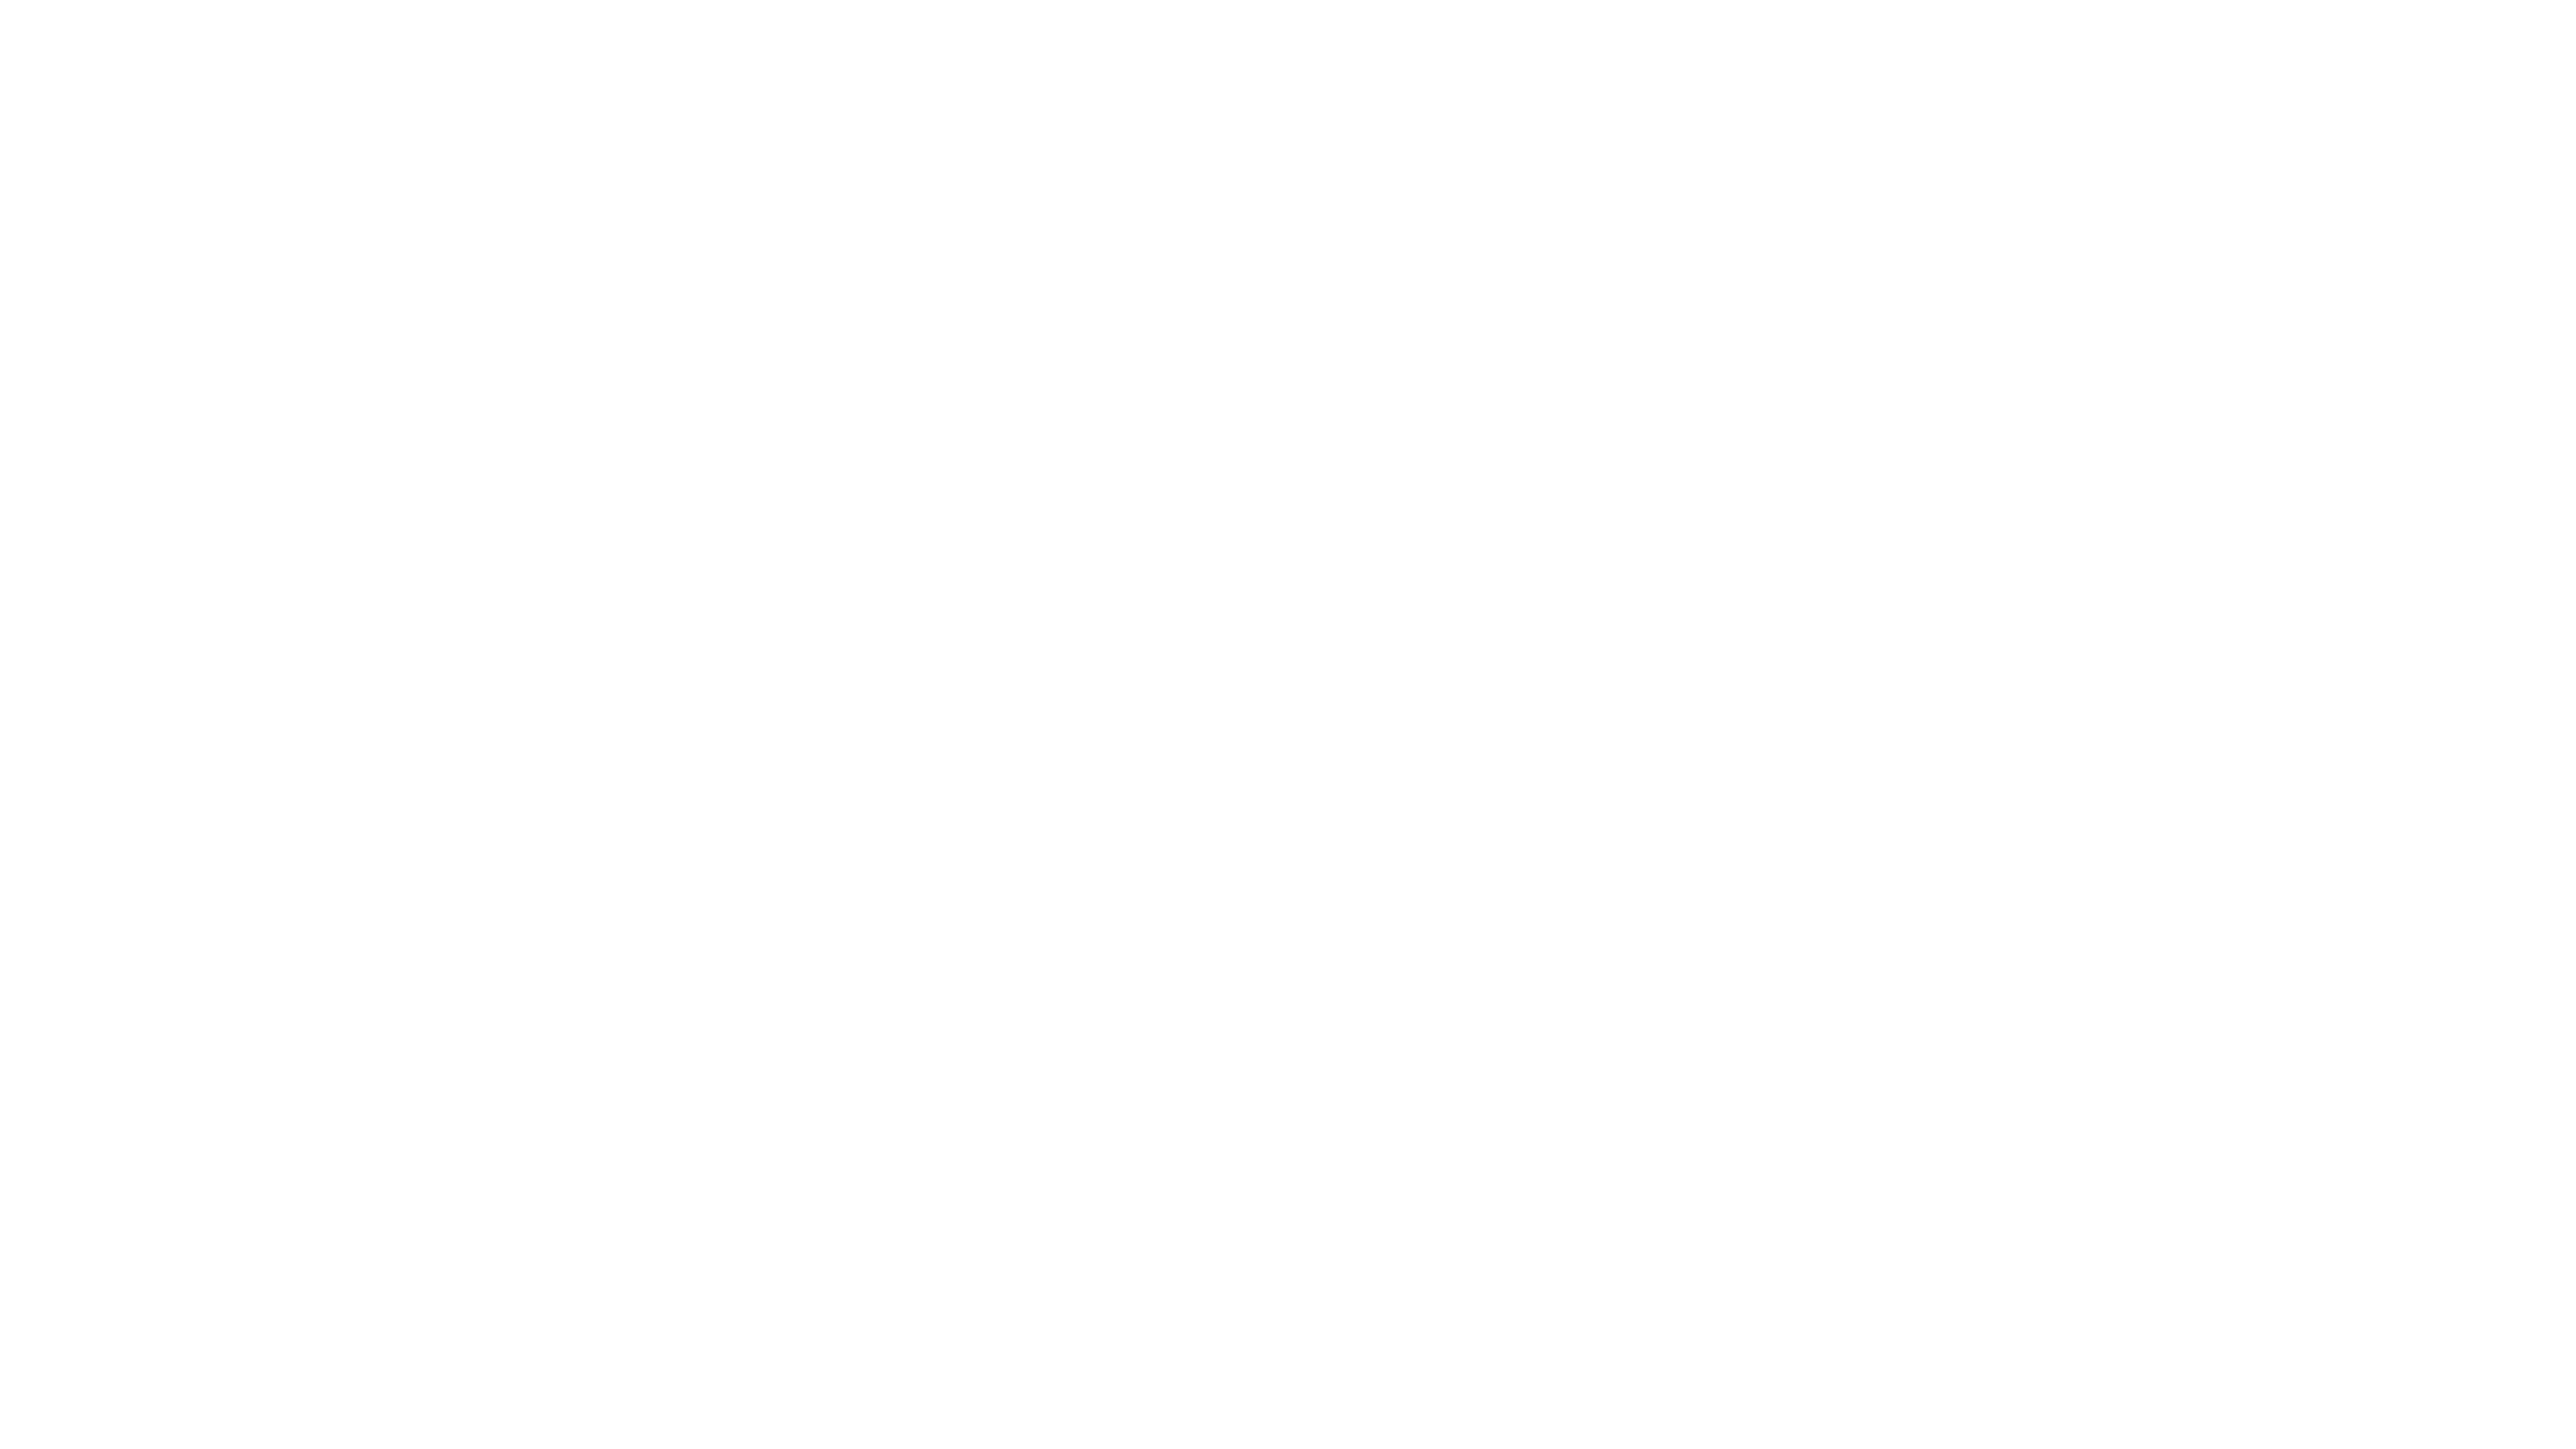 Odious Cellars Online Shop